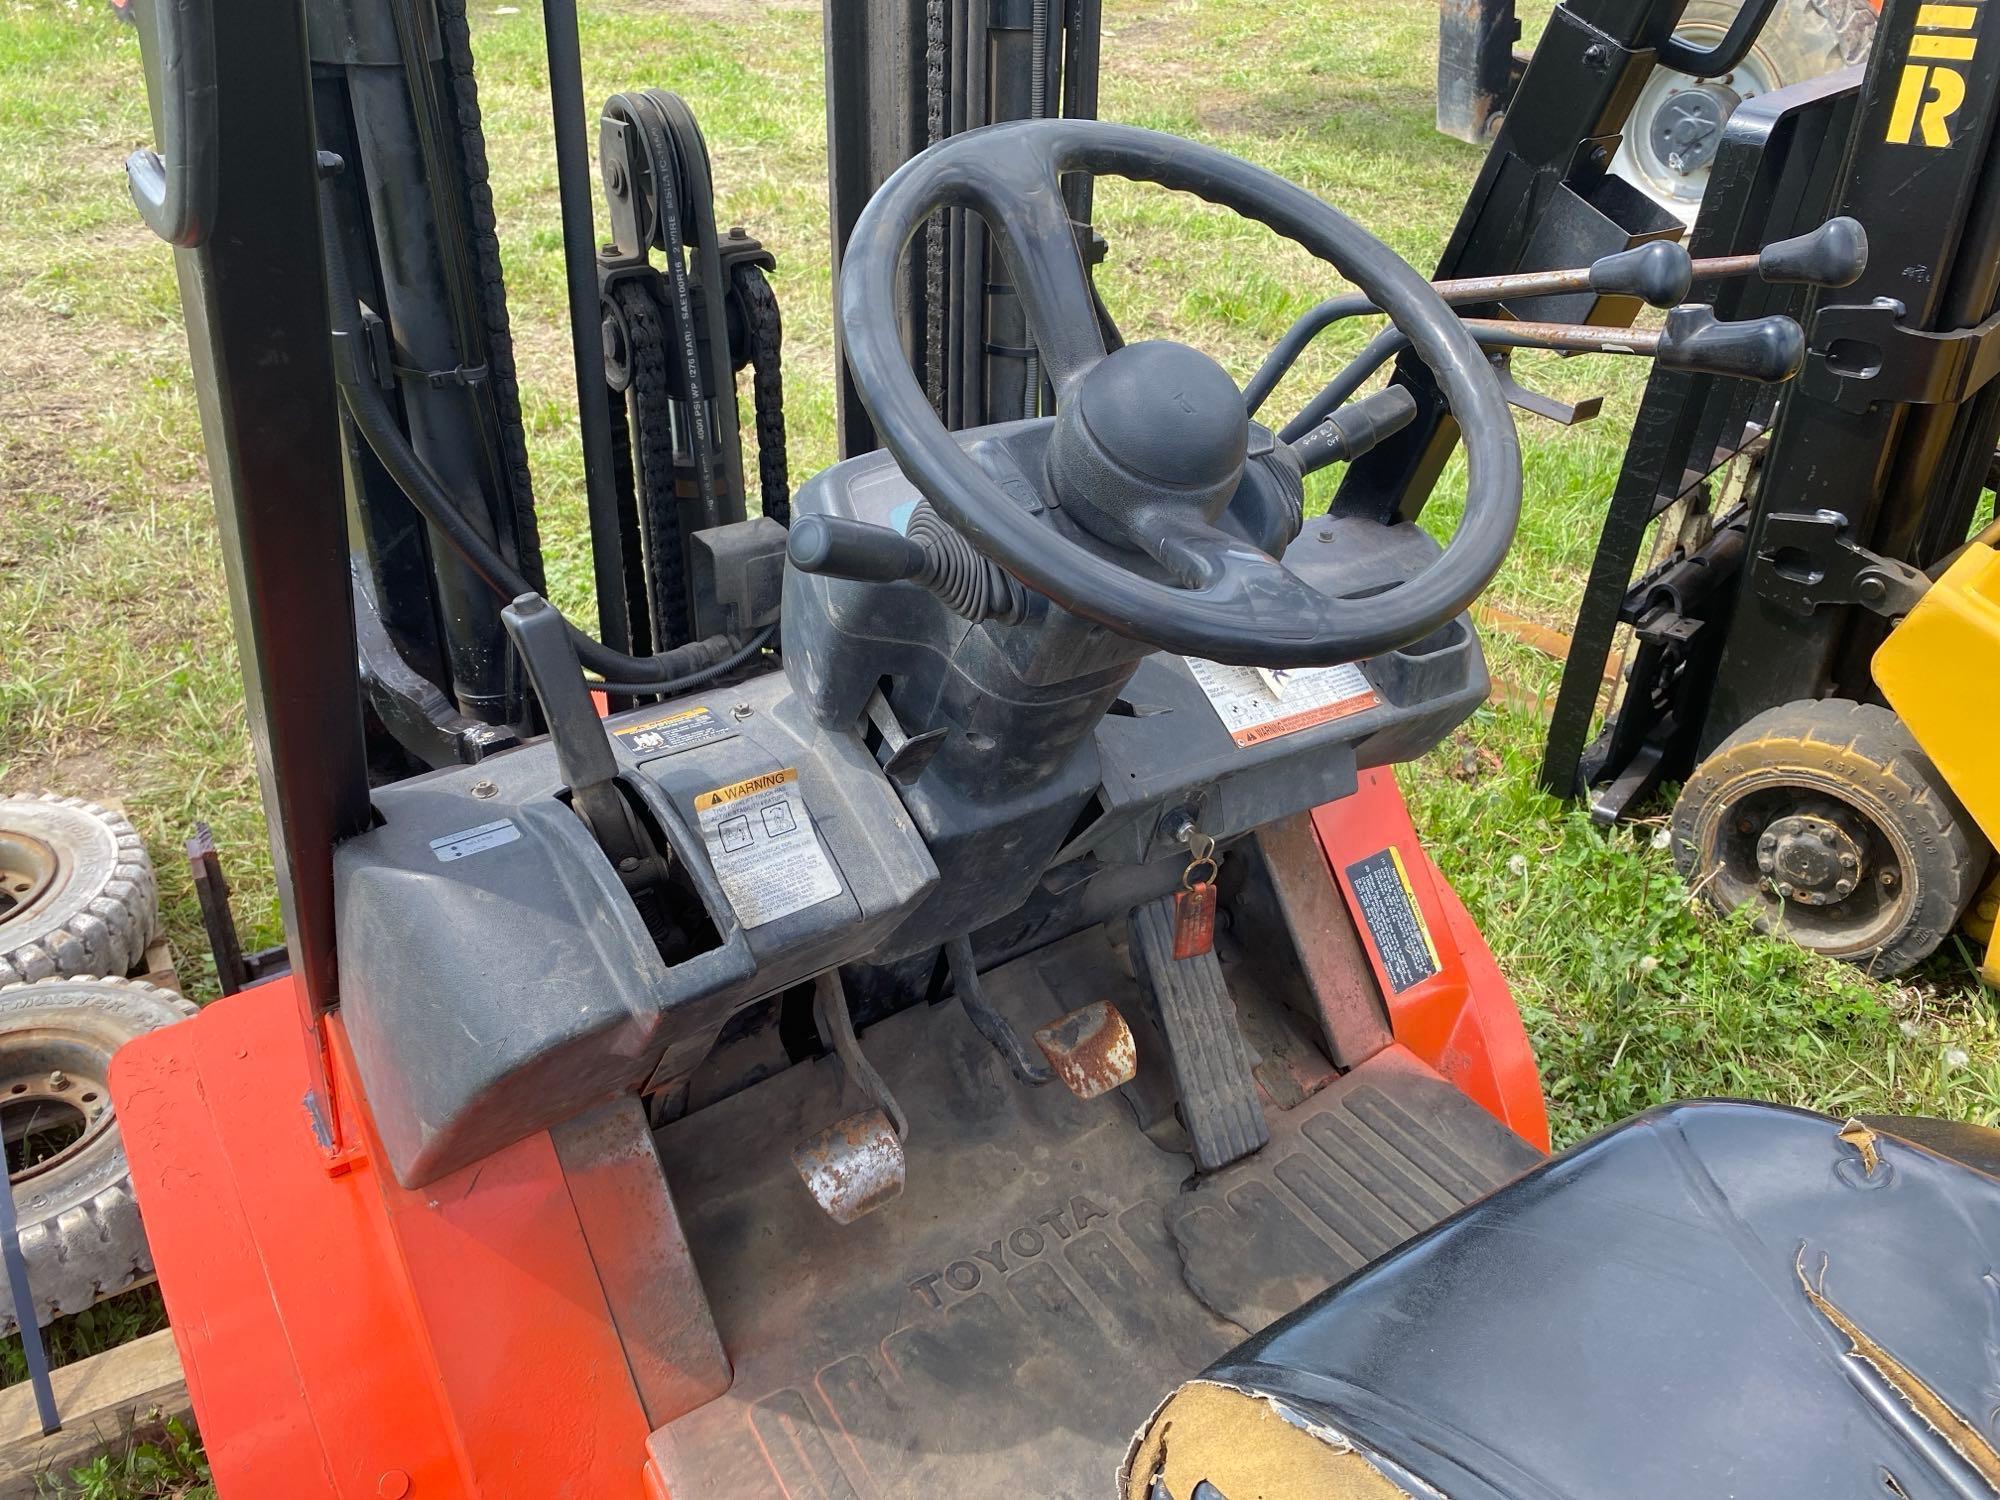 TOYOTA FORKLIFT SN-80717 powered by LP engine, equipped with OROPS, 5,000lb lift capacity,